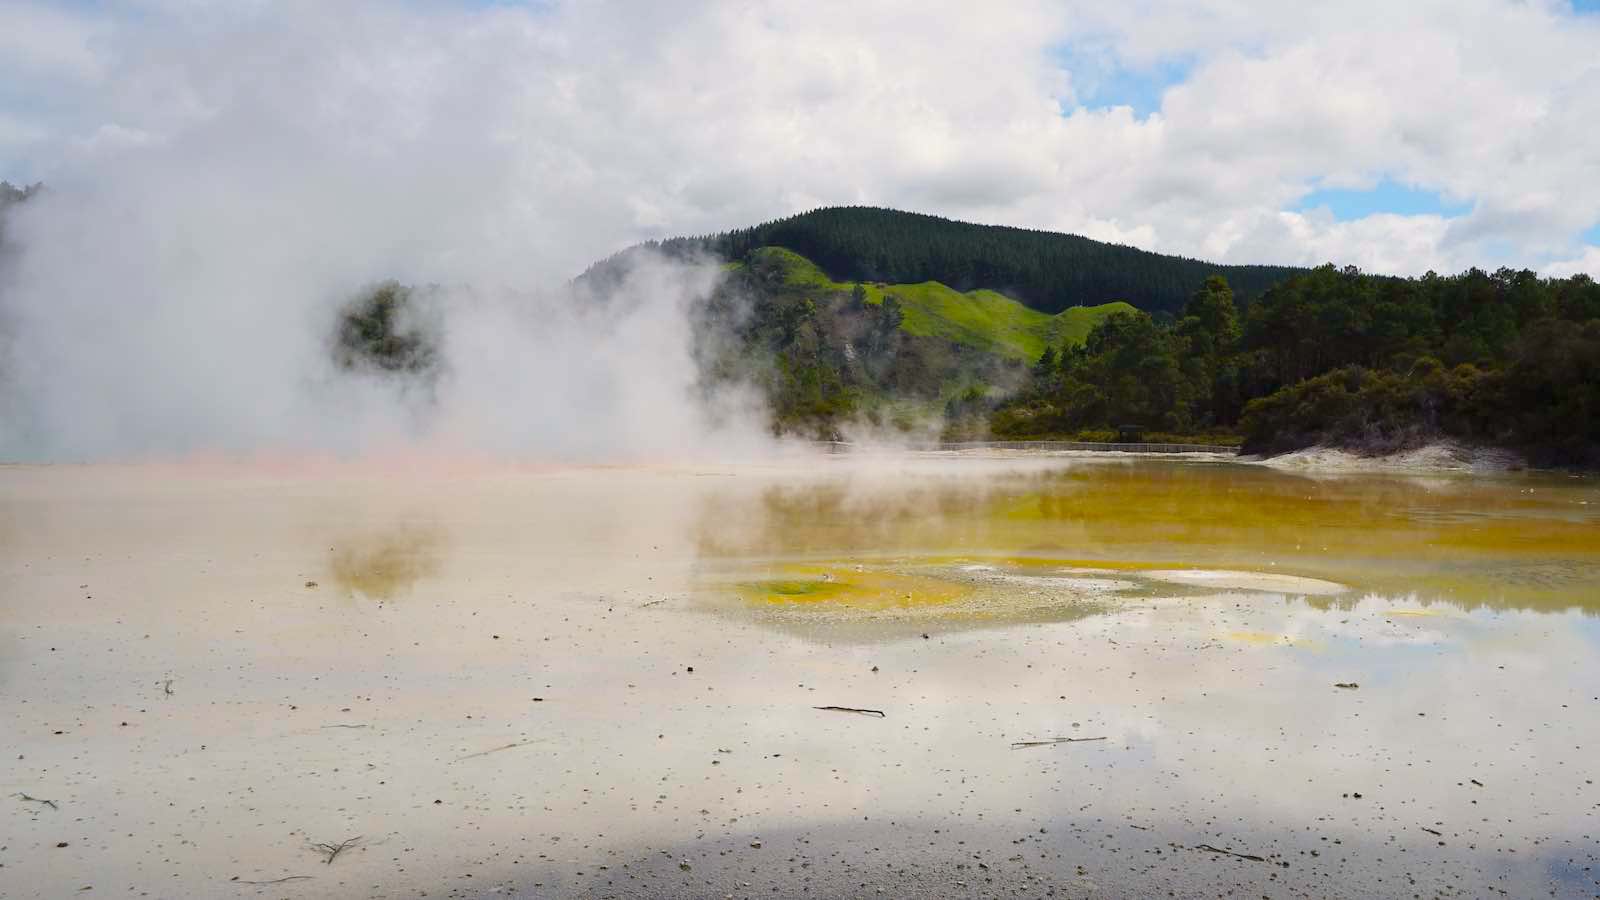 There were large swaths of boiling water like this all over Wai-o-tapu, often with different colors of green, yellow, orange, brown, like someone spilled paint in a lake